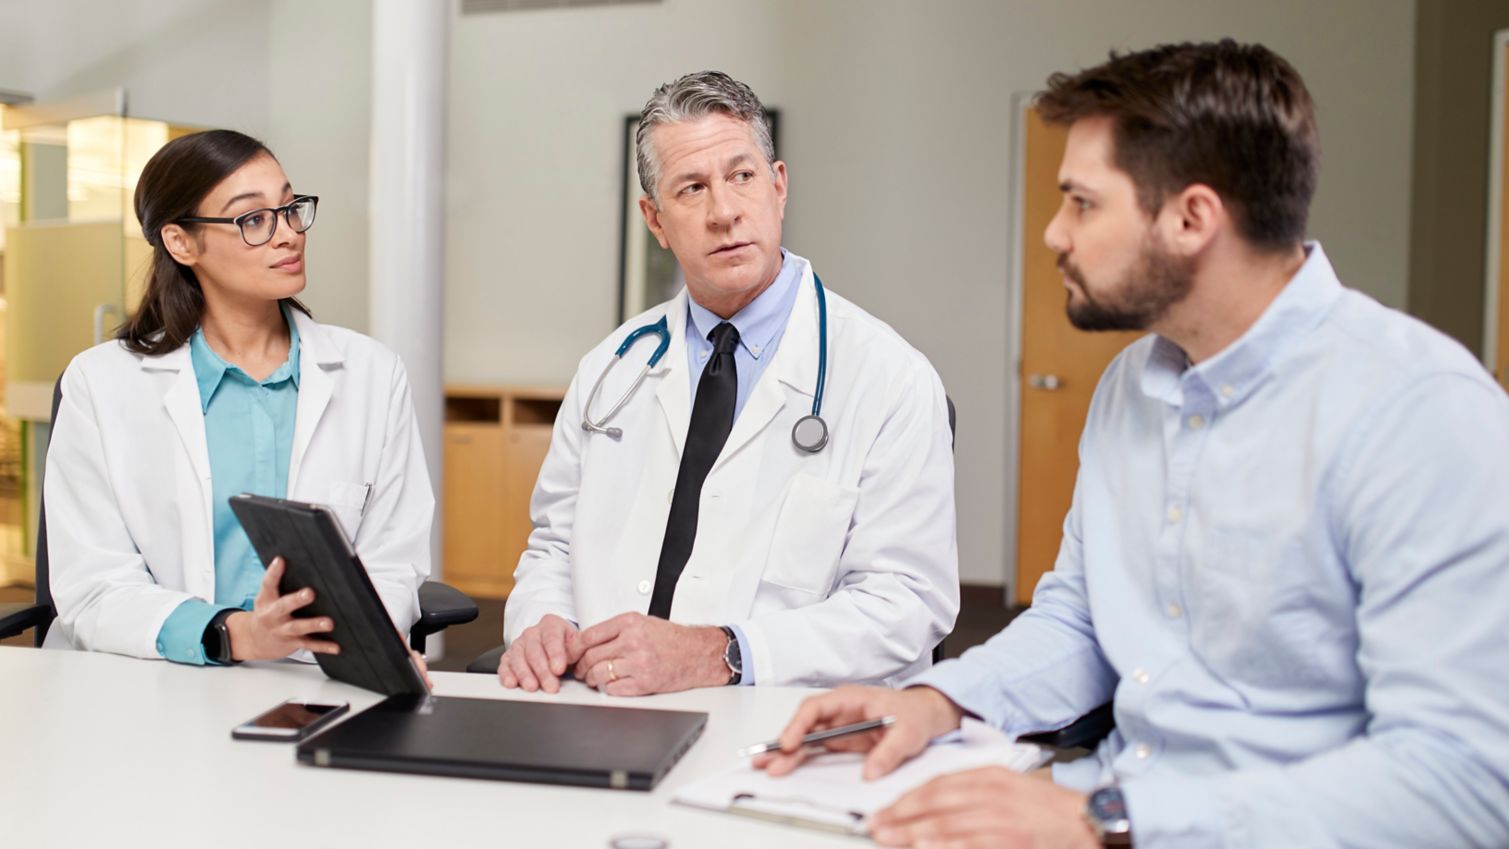 Three physicians discuss patient care